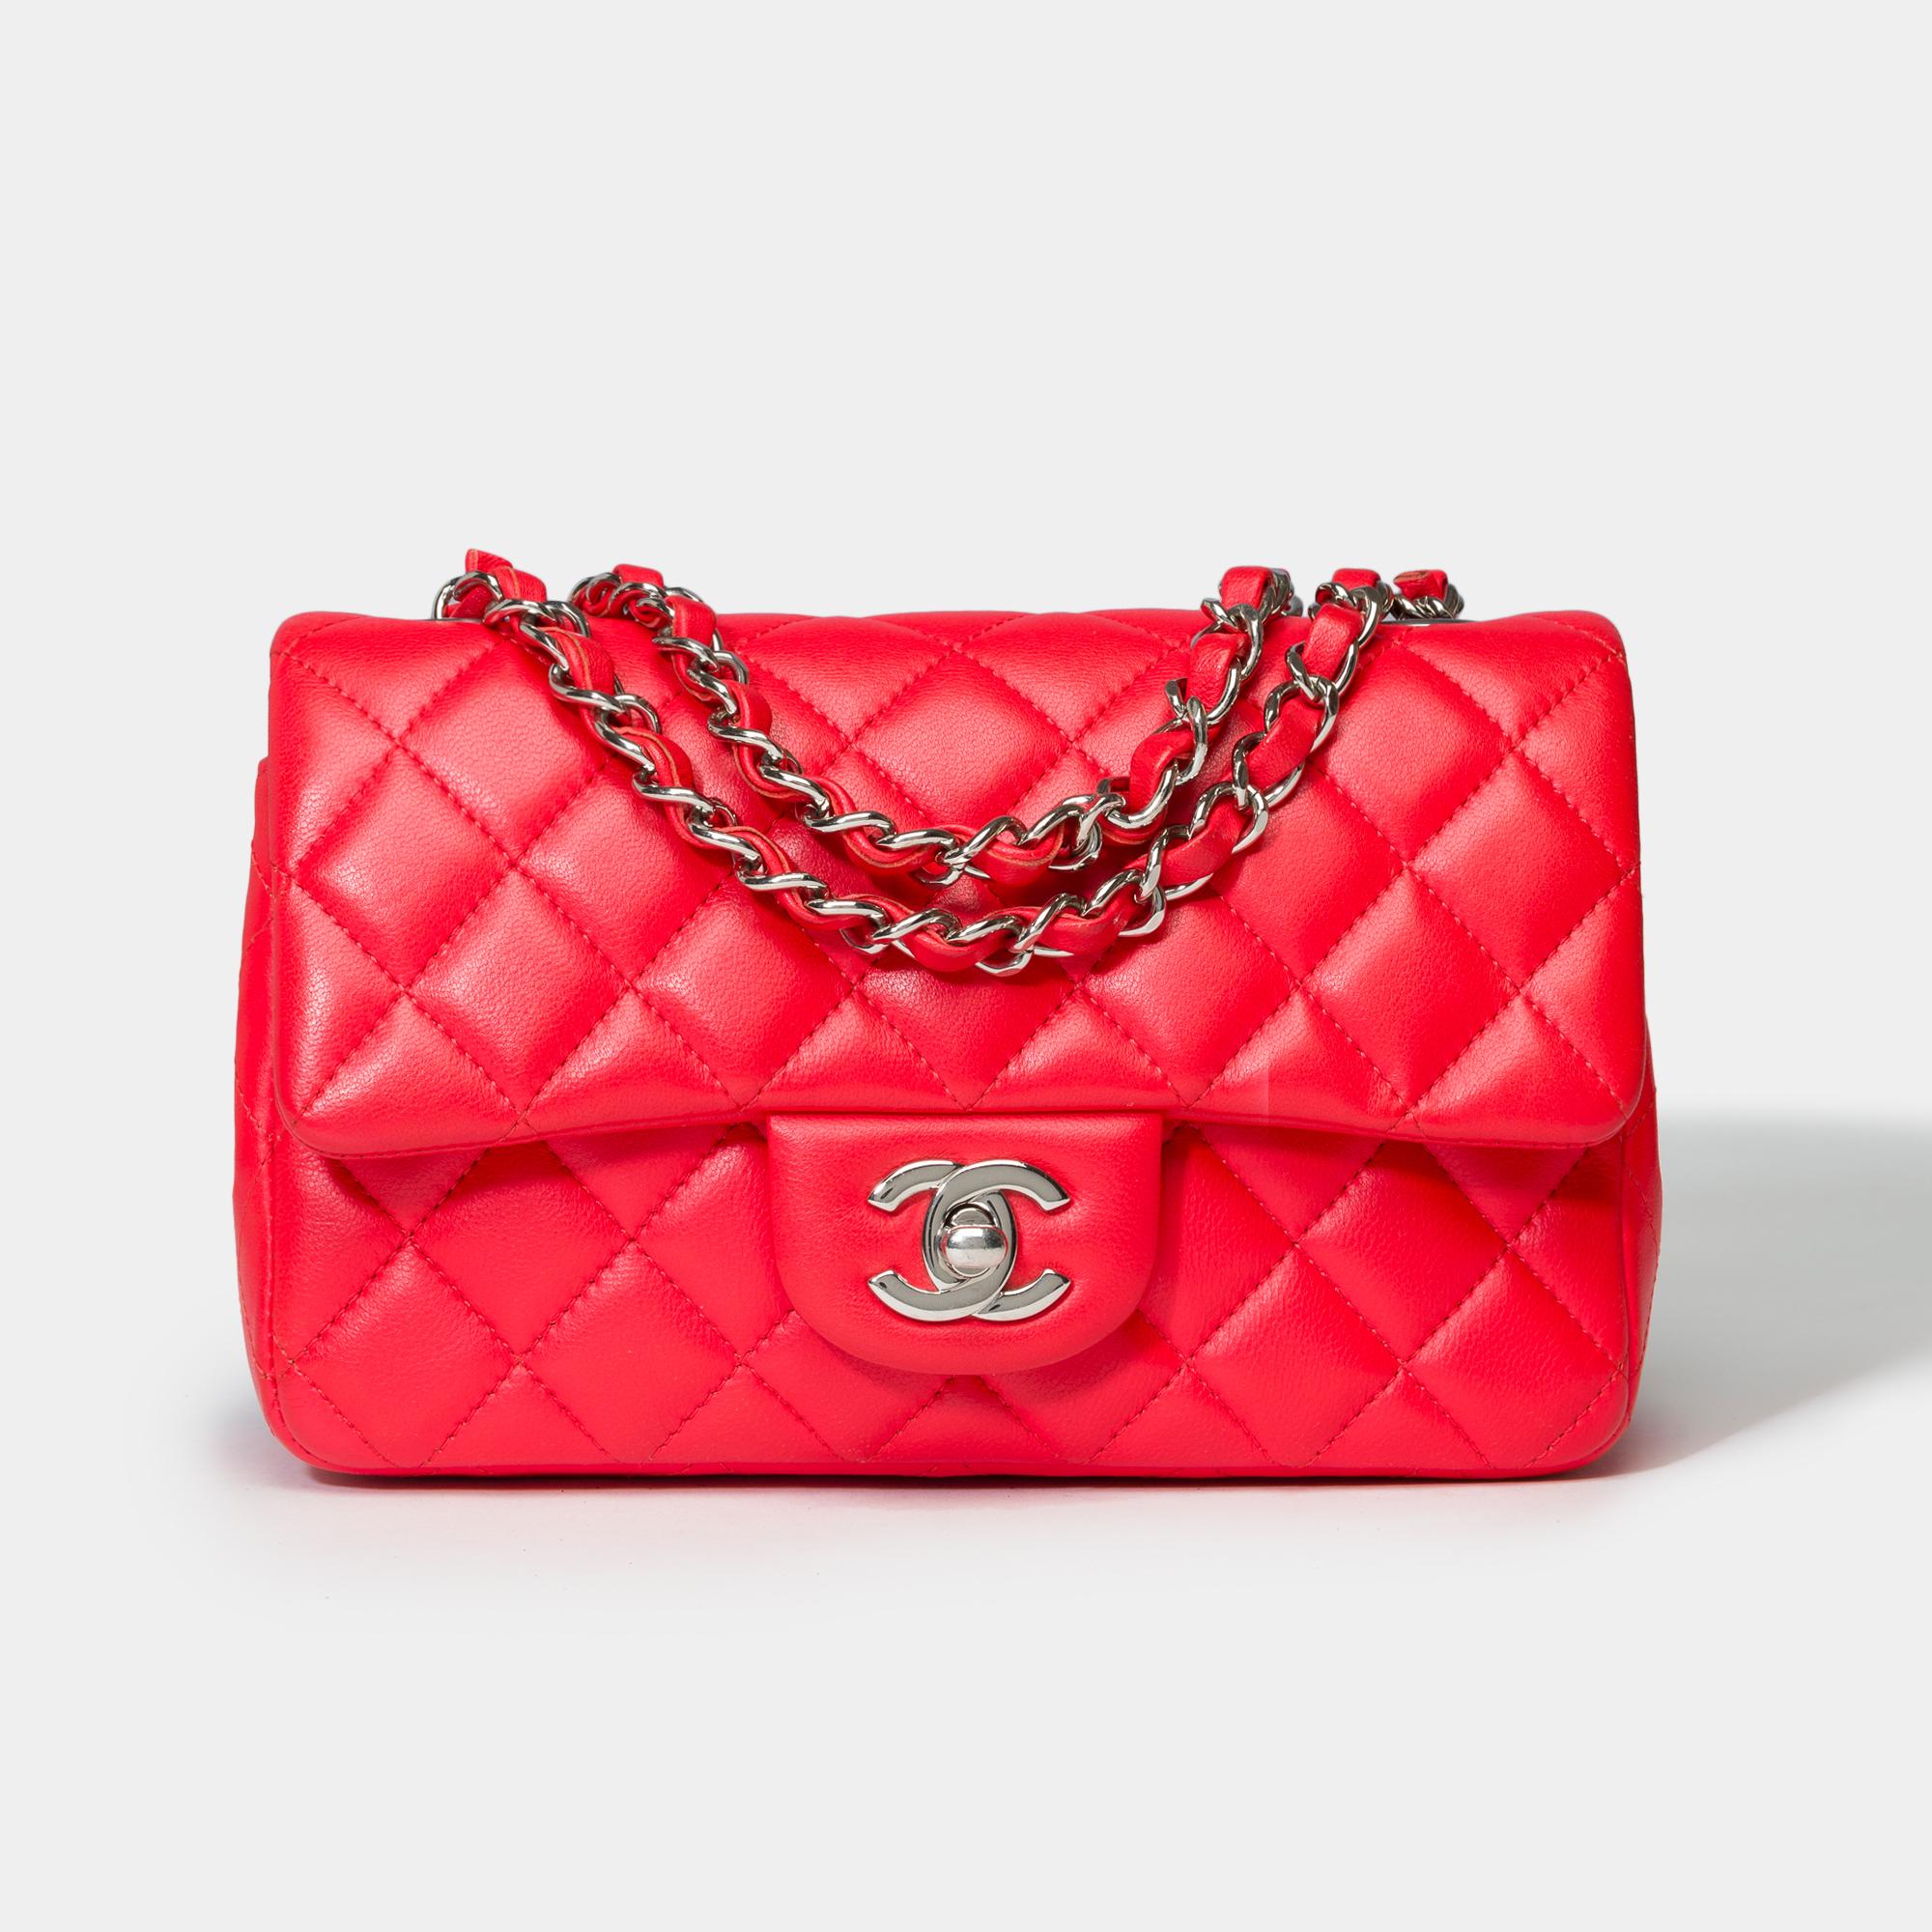 Amazing​ ​Chanel​ ​Timeless​ ​Mini​ ​shoulder​ ​bag​ ​in​ ​red​ ​quilted​ ​lambskin​ ​leather,​ ​silver​ ​metal​ ​trim,​ ​a​ ​chain​ ​handle​ ​in​ ​silver​ ​metal​ ​interlaced​ ​with​ ​red​ ​leather​ ​for​ ​a​ ​hand​ ​or​ ​shoulder​ ​or​ ​crossbody​